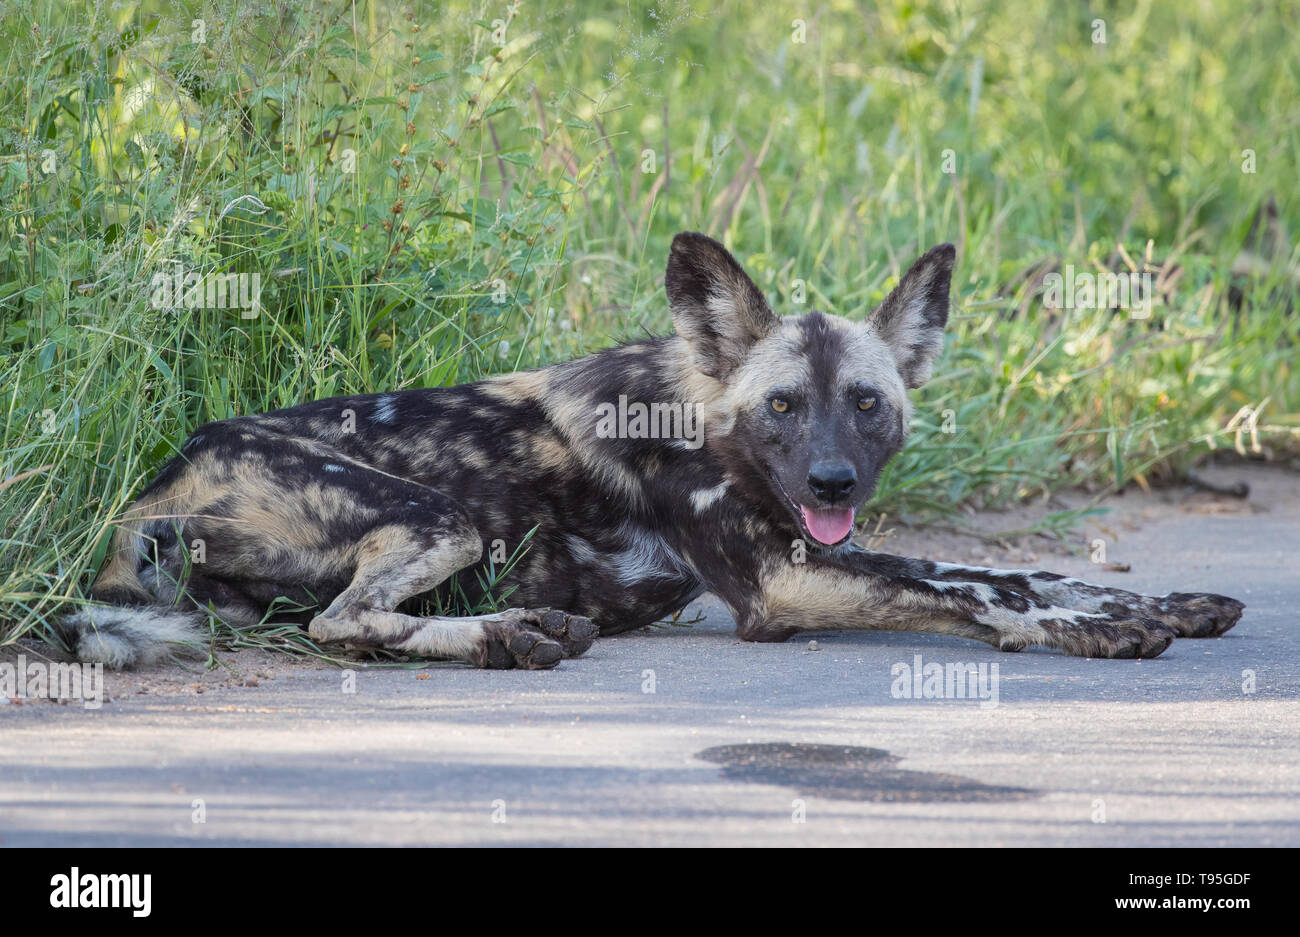 Wild Dogs in the Greater Kruger National Park, South Africa Stock Photo